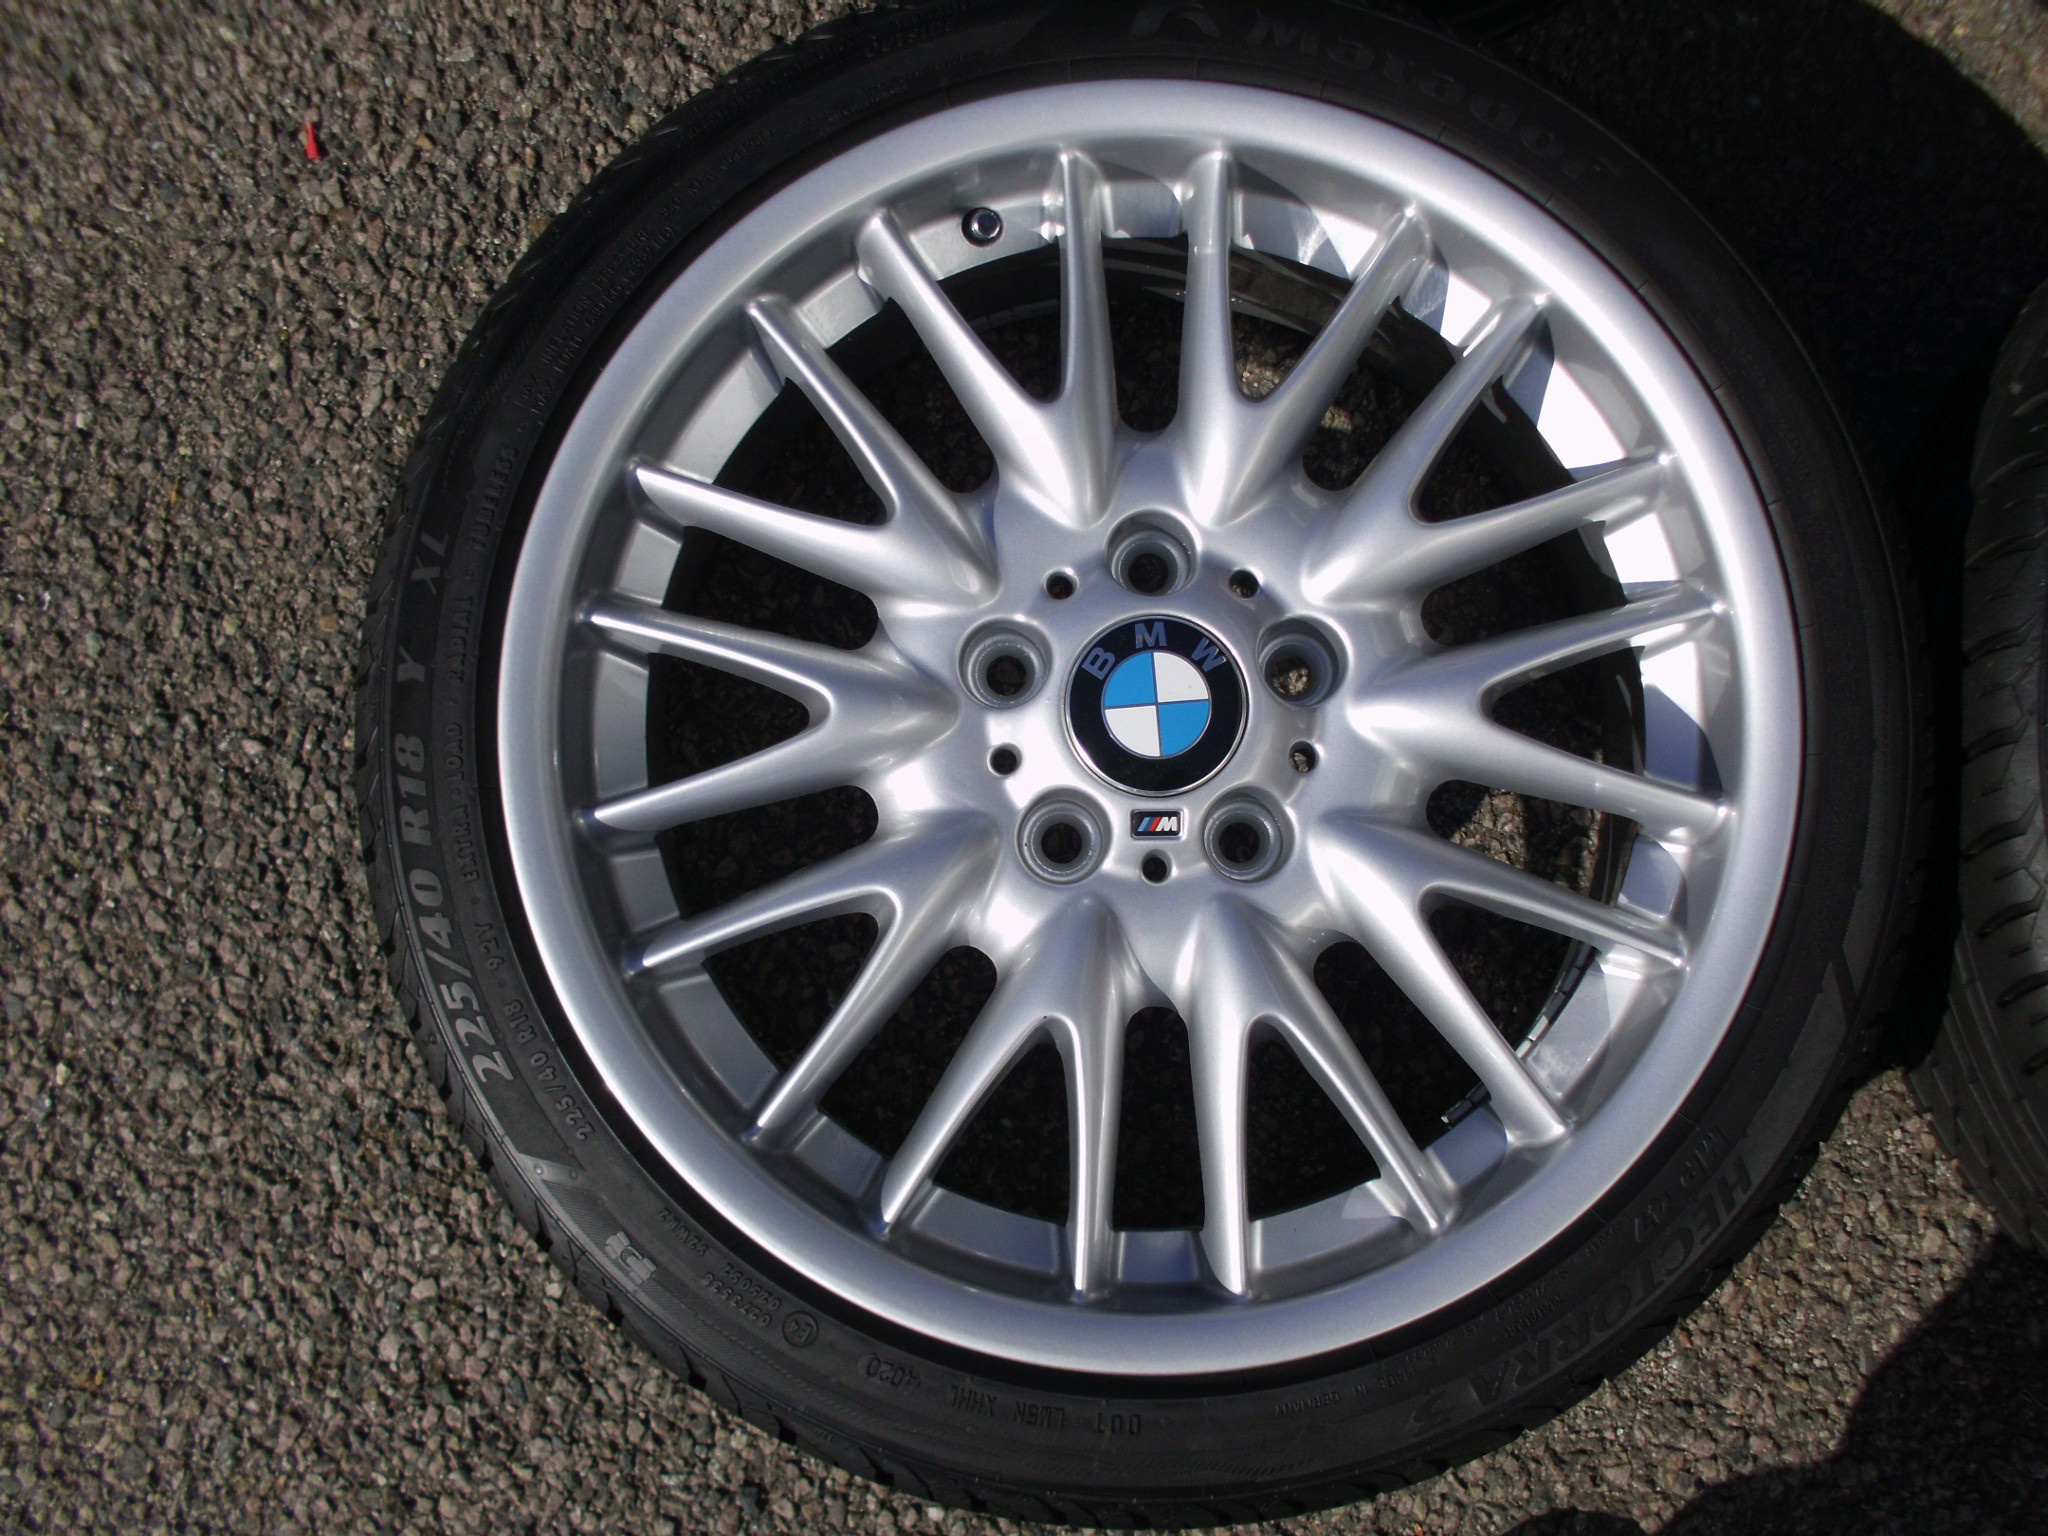 USED 18" GENUINE BMW STYLE 72 E46 MV SPORT ALLOY WHEELS, WIDE REAR,FULLY REFURBED INC TYRES